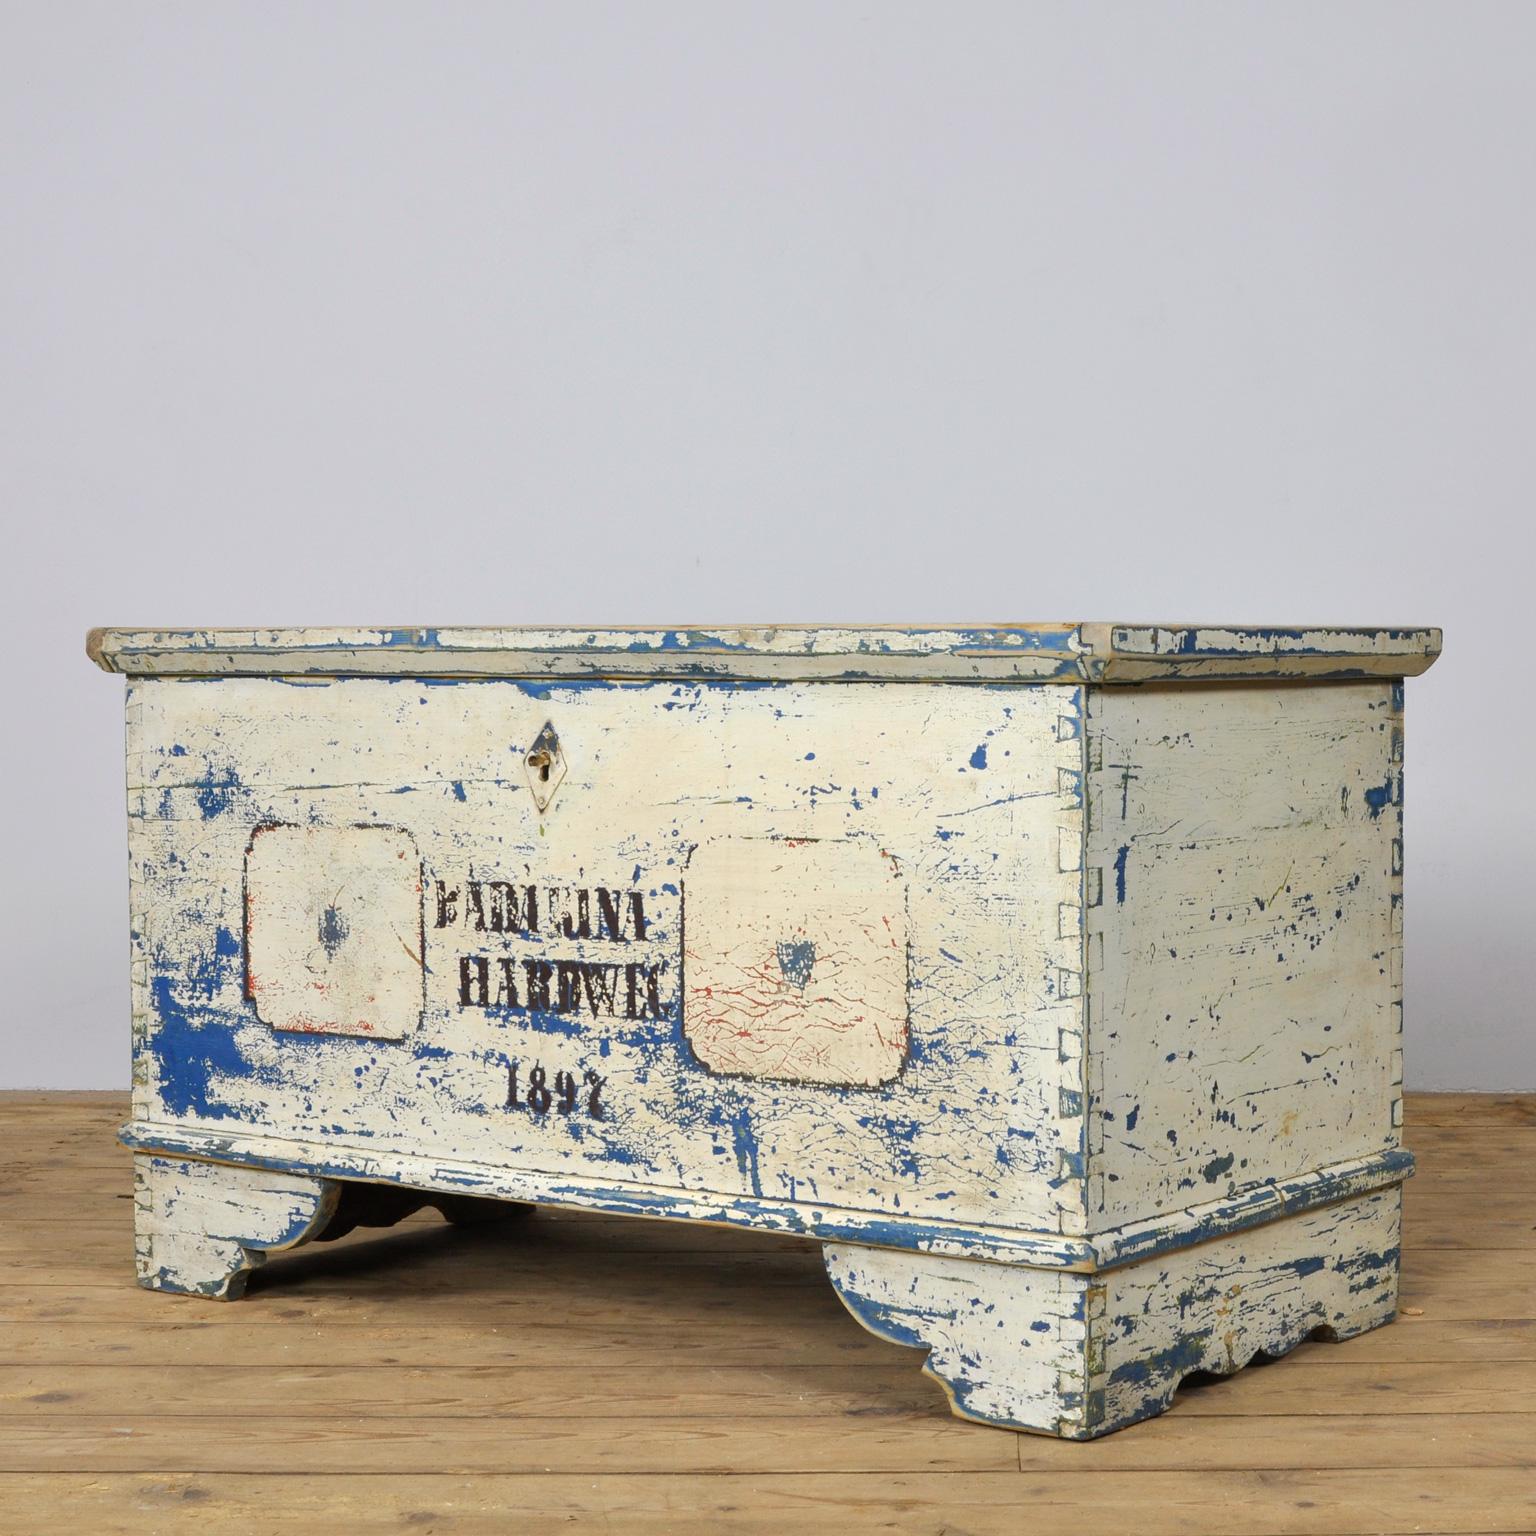 Trunk made of pine. With beautiful distressed paint. Produced in 1892.